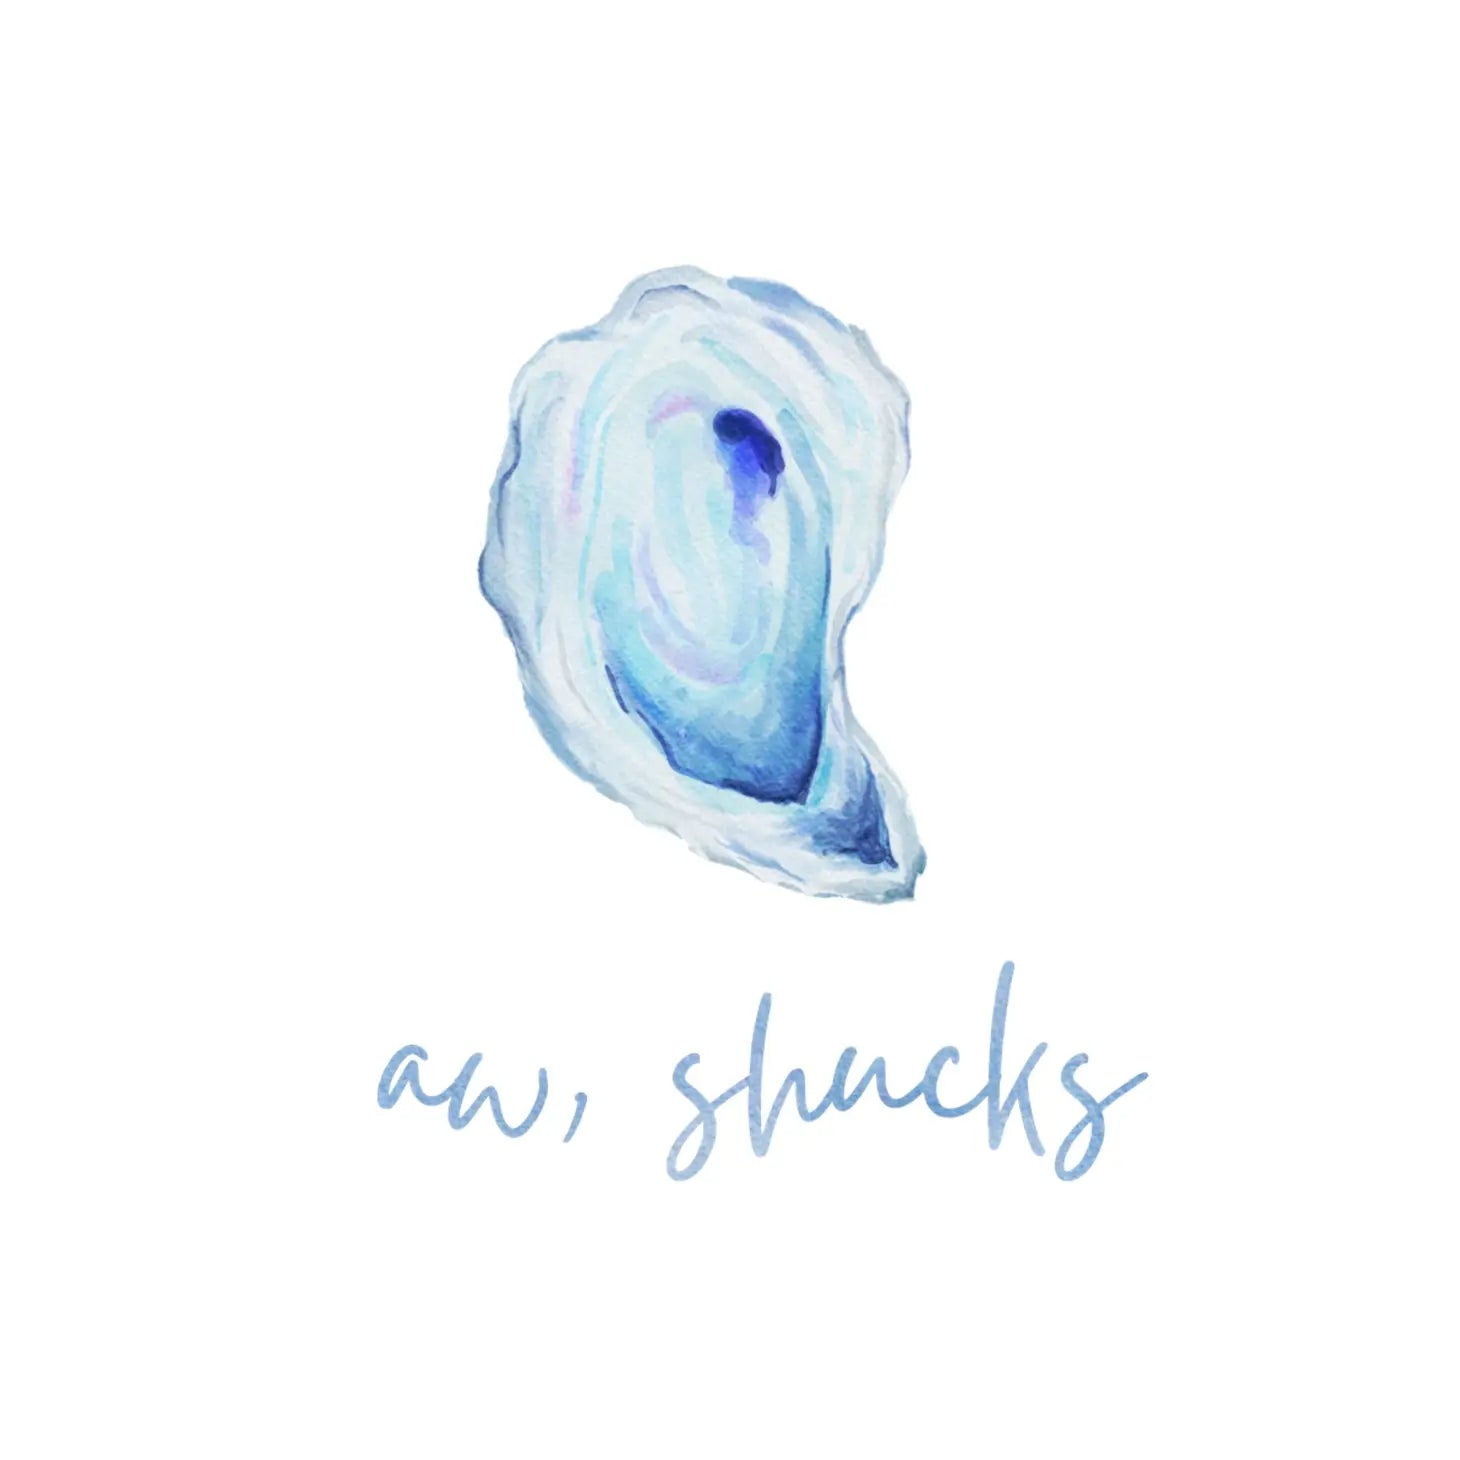 "Aw, Shucks" Watercolor Oyster Greeting Card